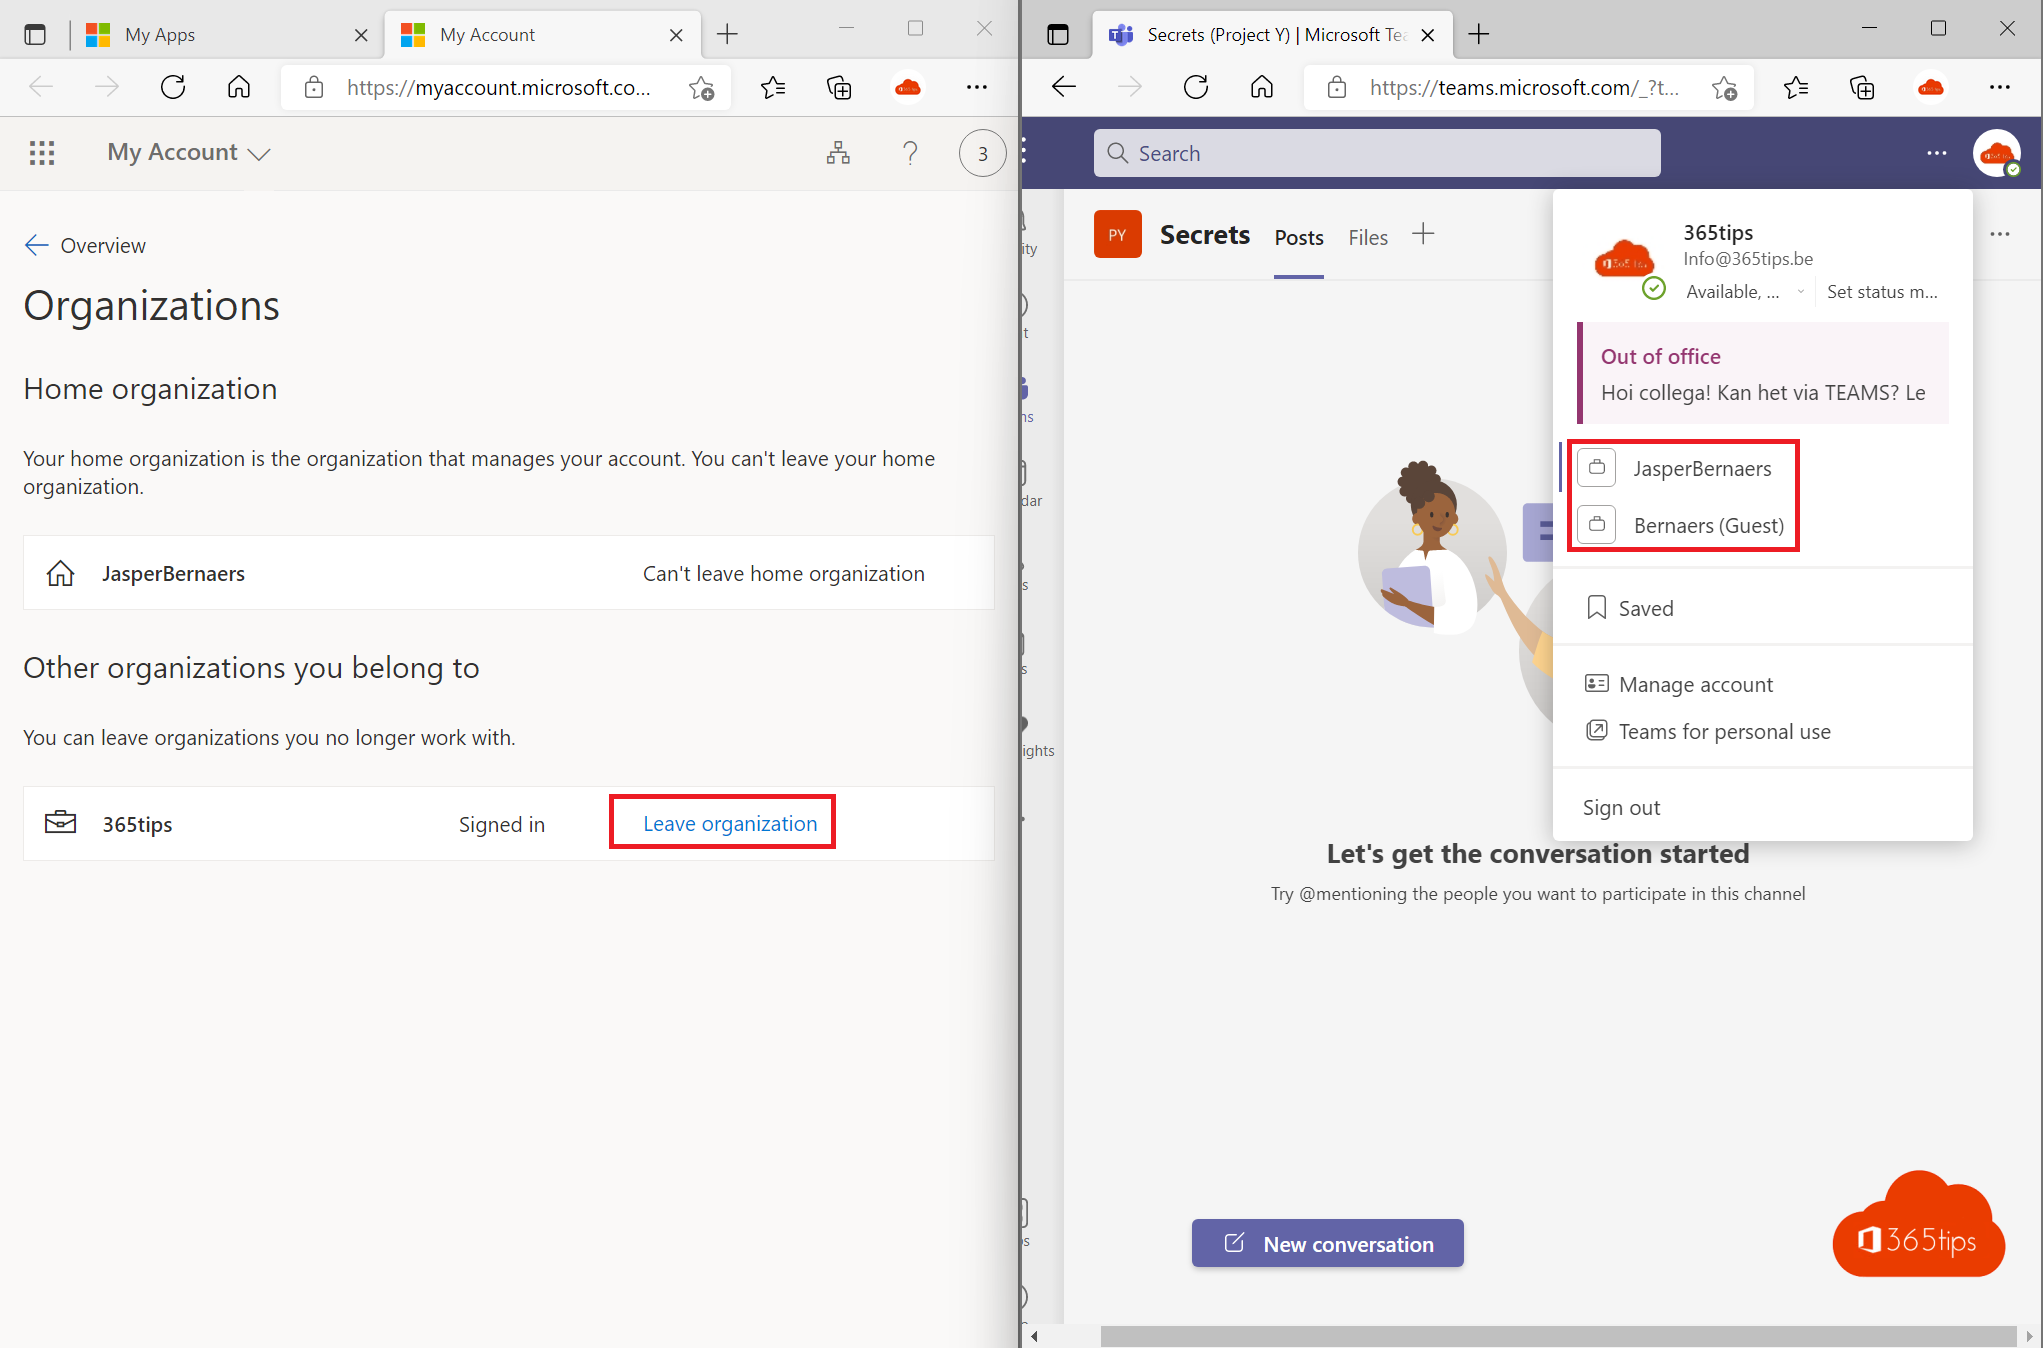 Remove yourself (as a guest) in another Microsoft Teams organisation or tenant